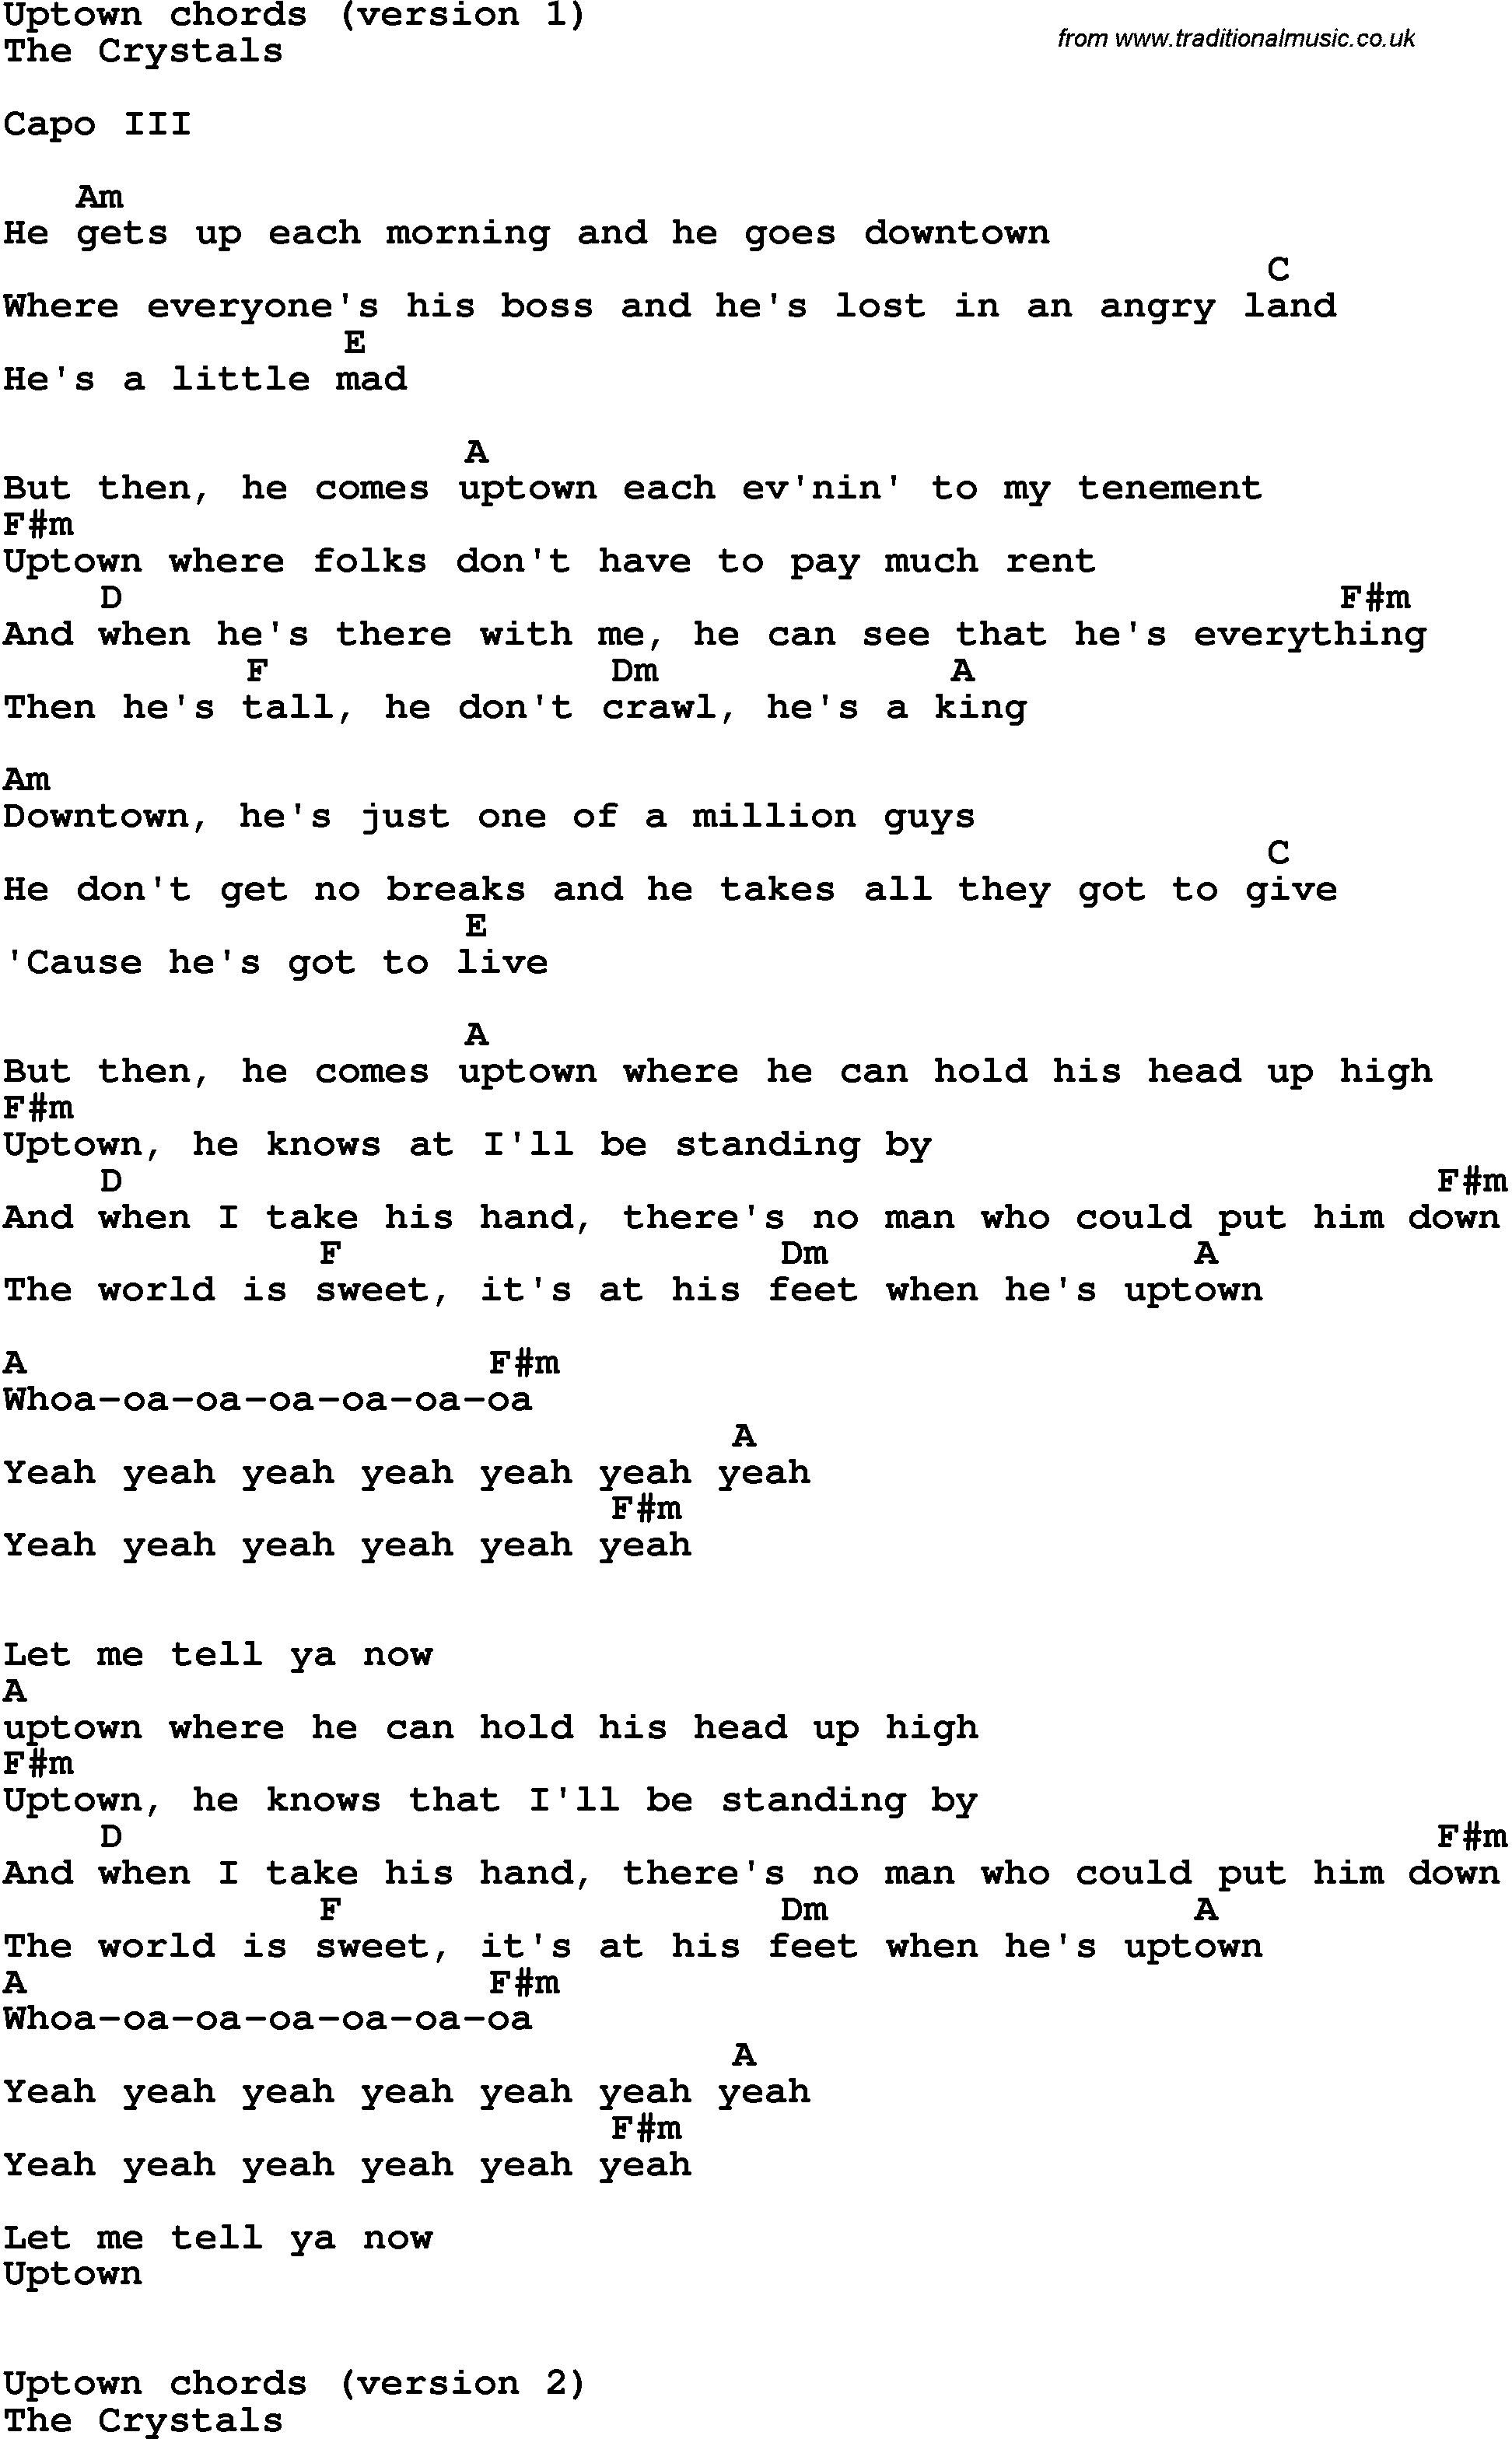 Song Lyrics with guitar chords for Uptown